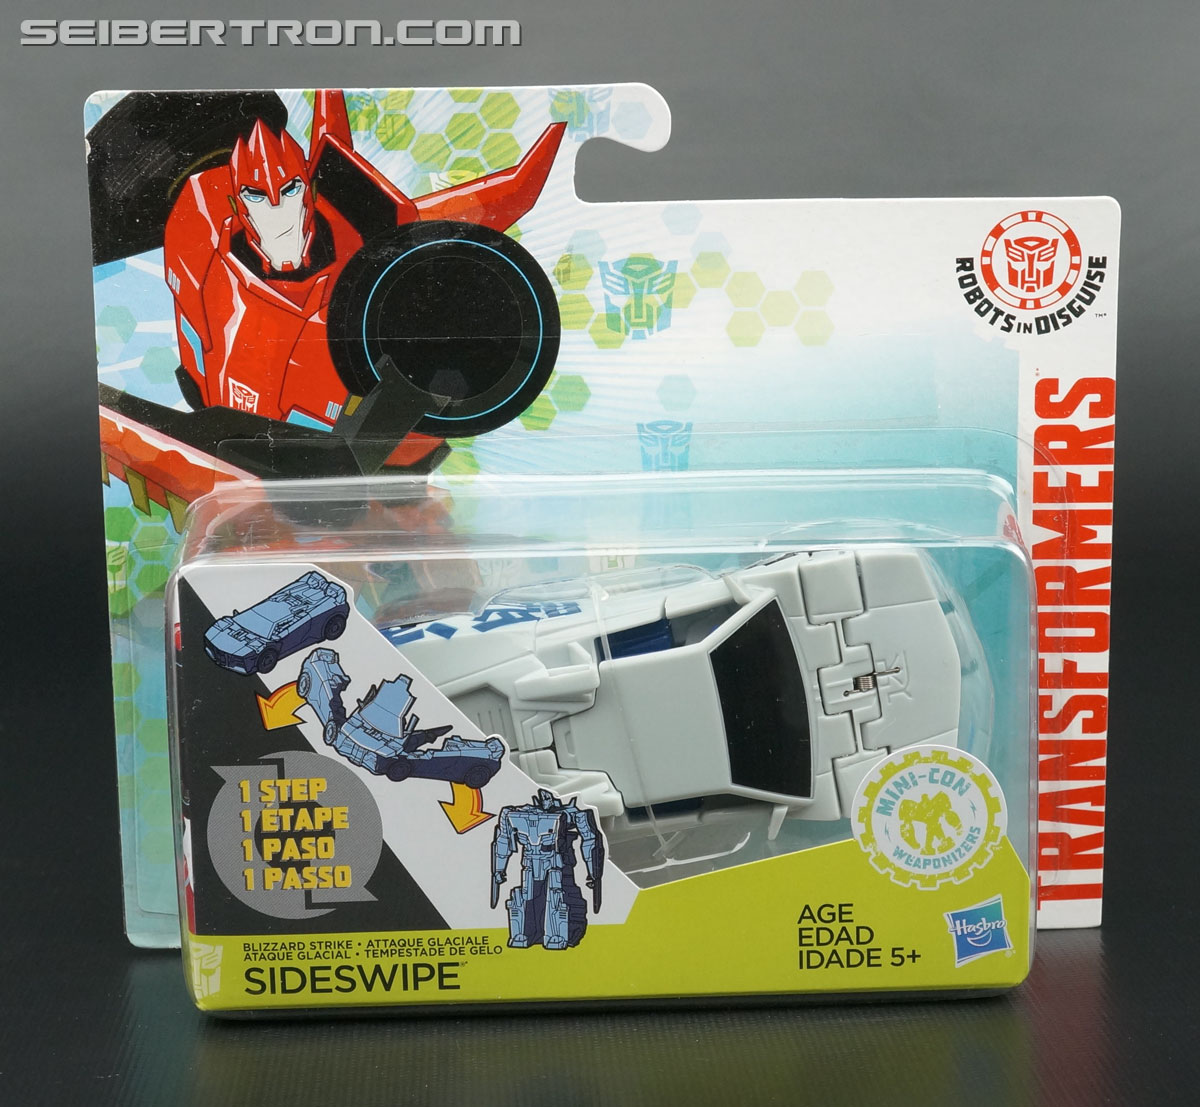 Transformers: Robots In Disguise Blizzard Strike Sideswipe (Image #1 of 72)